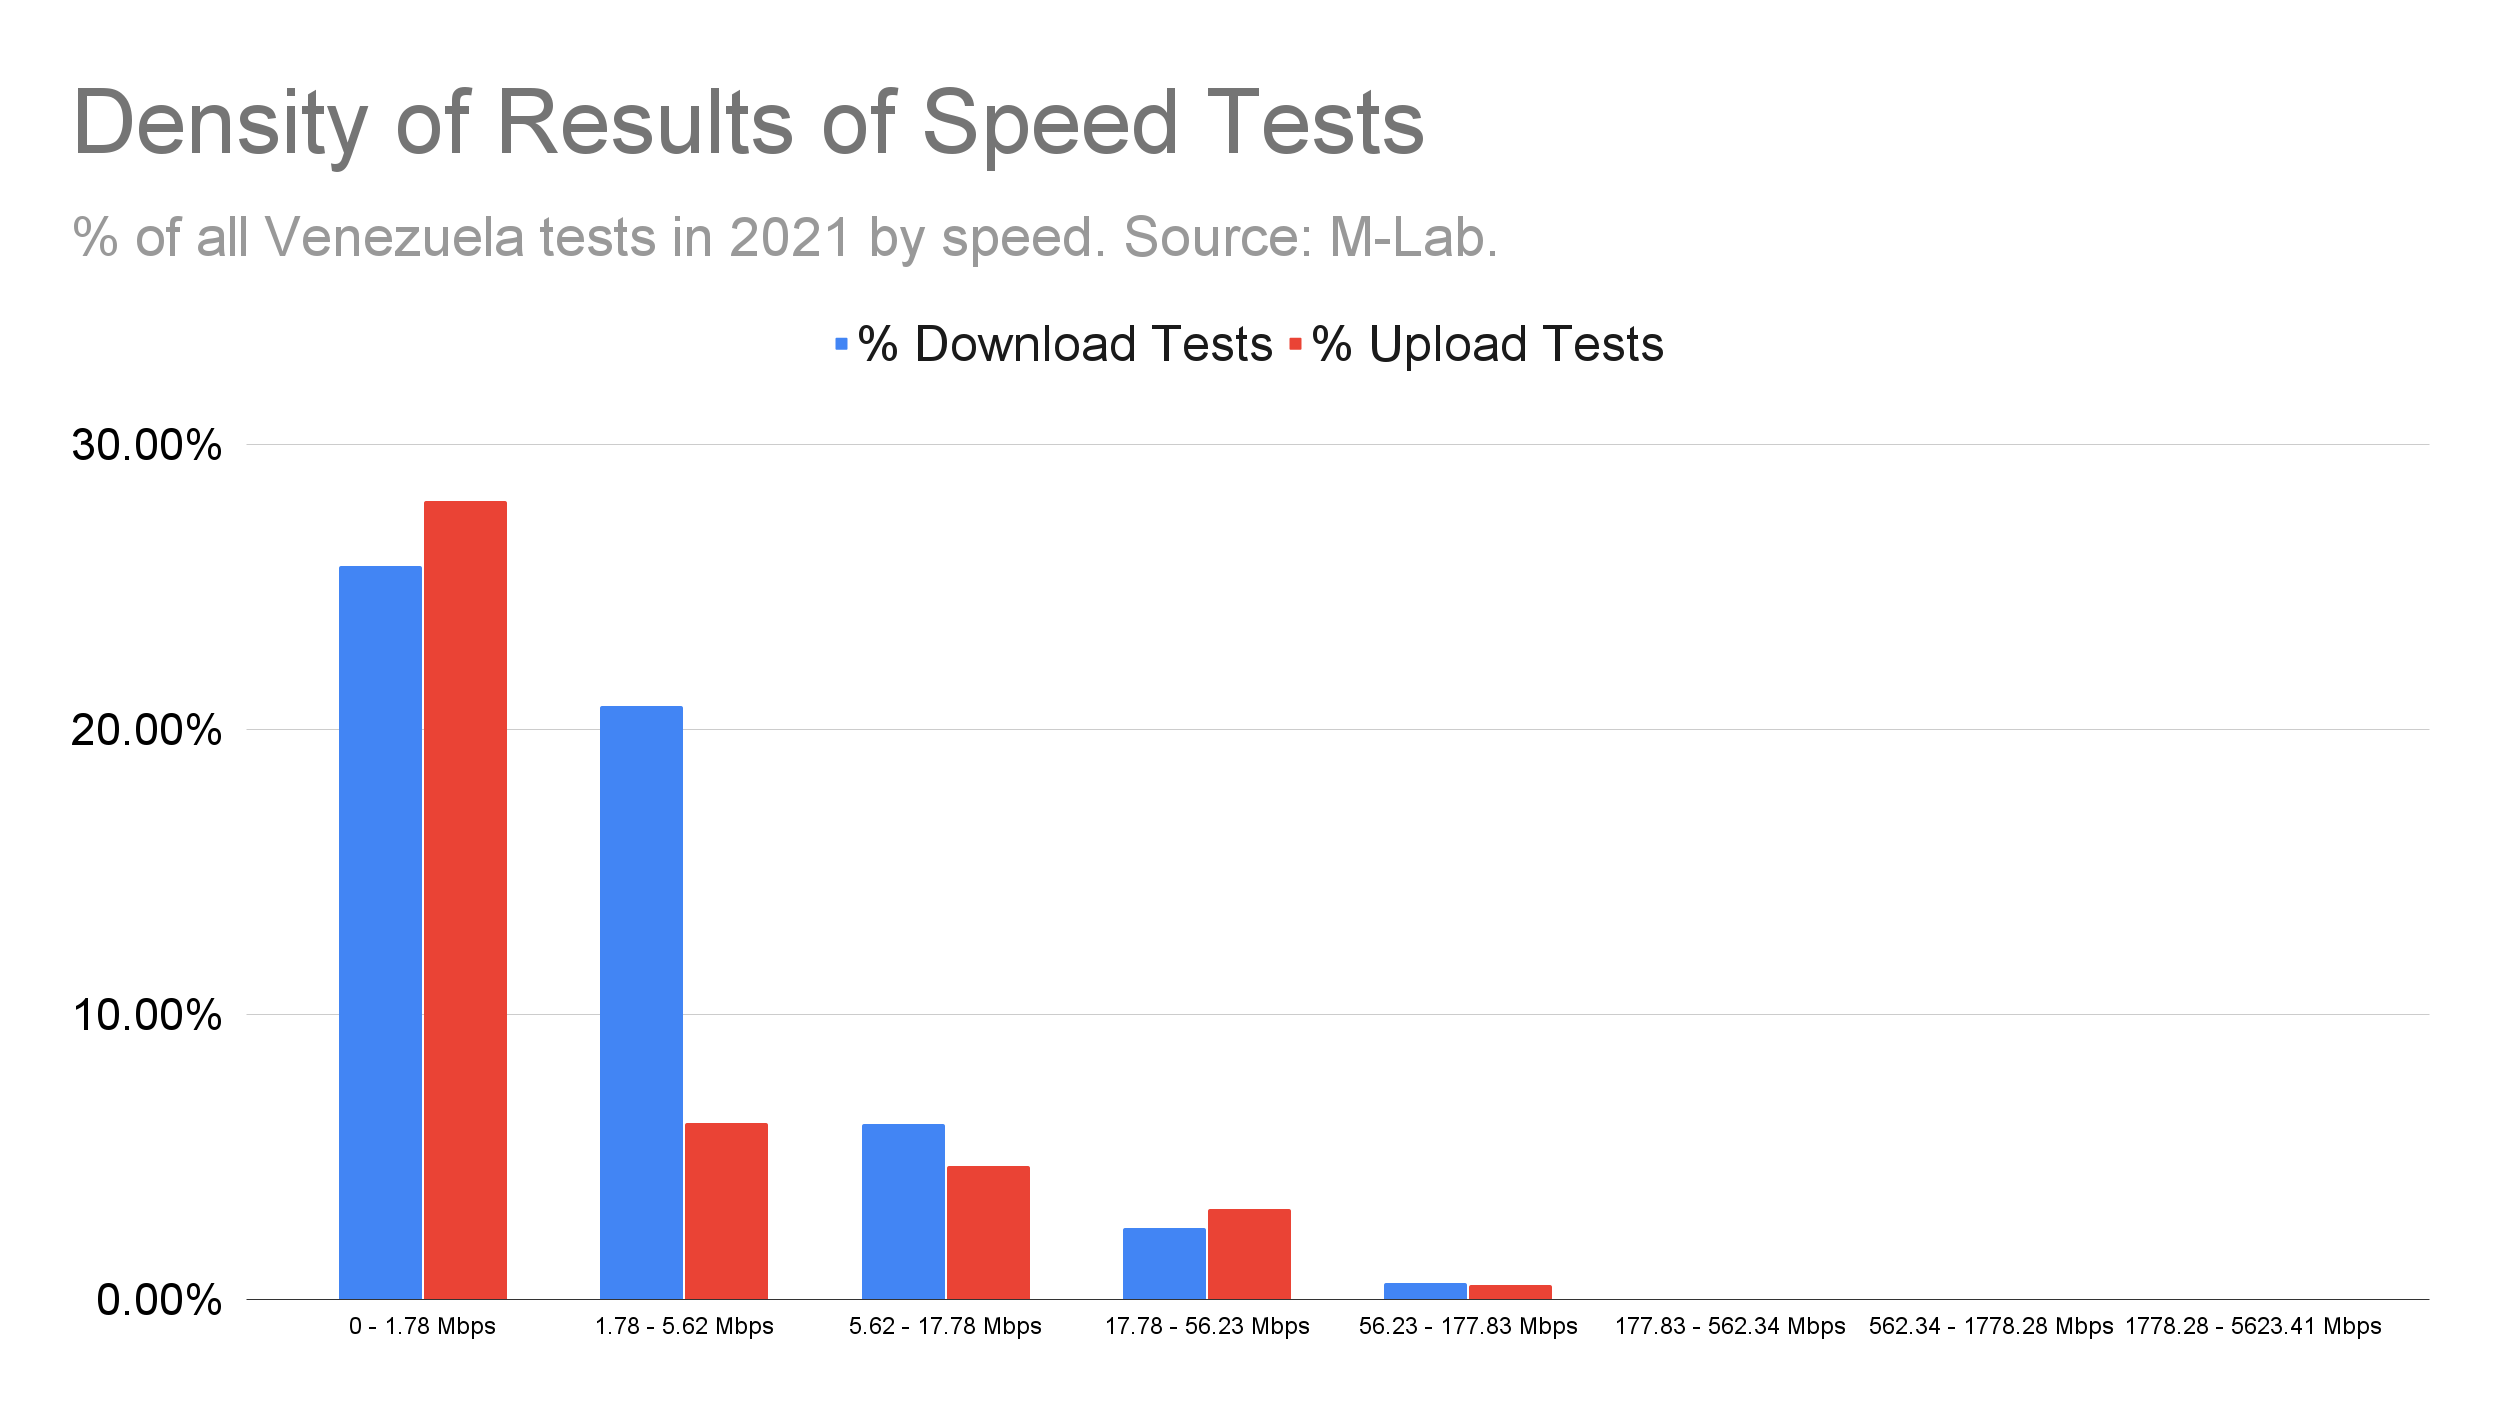 Density of speed test results